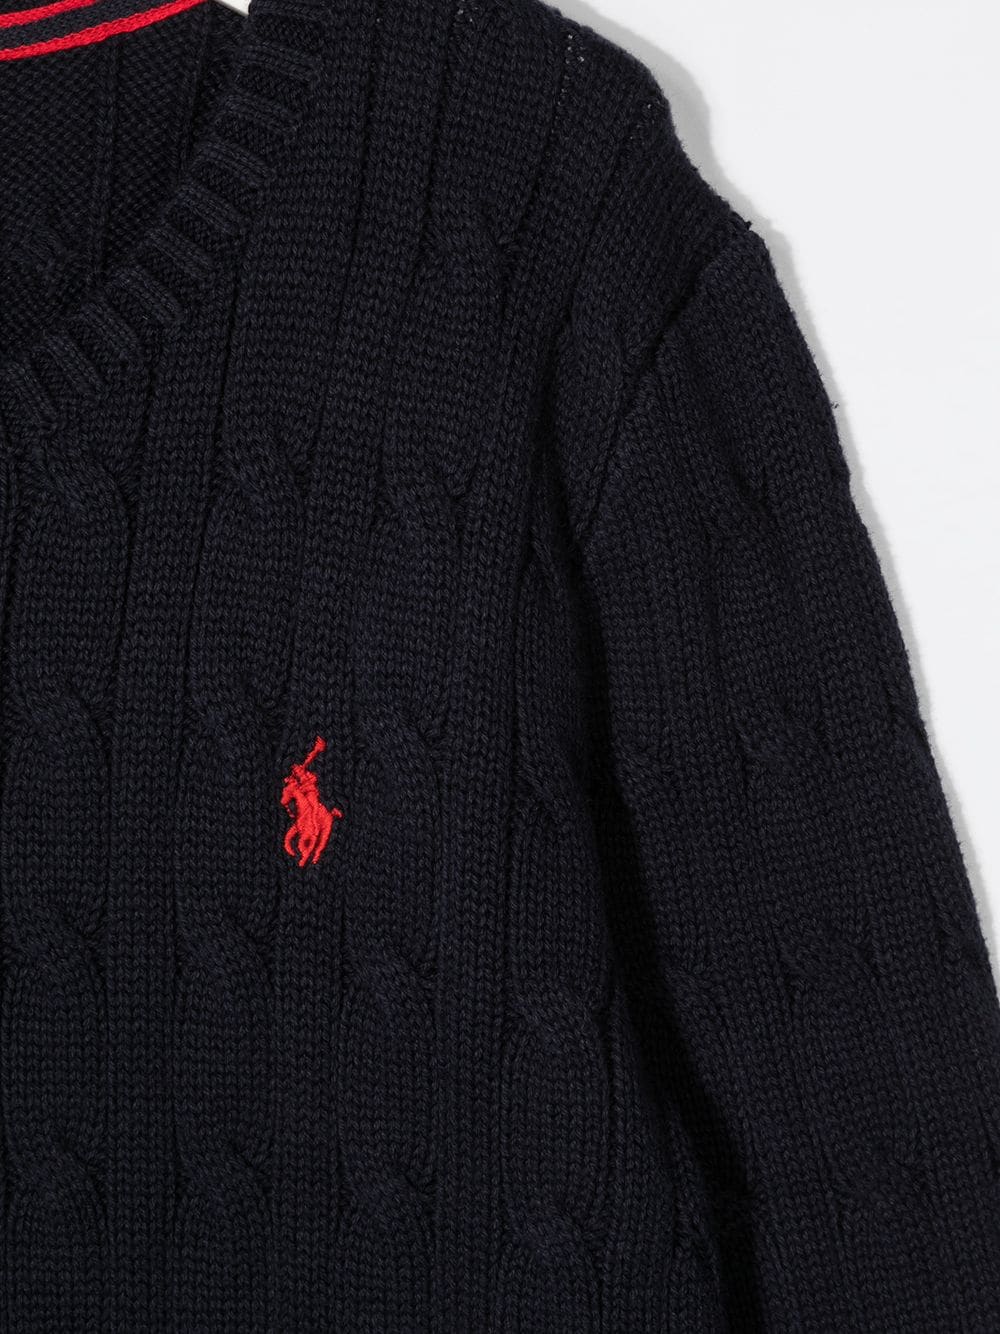 Navy cotton long-sleeved embroidered logo jumper